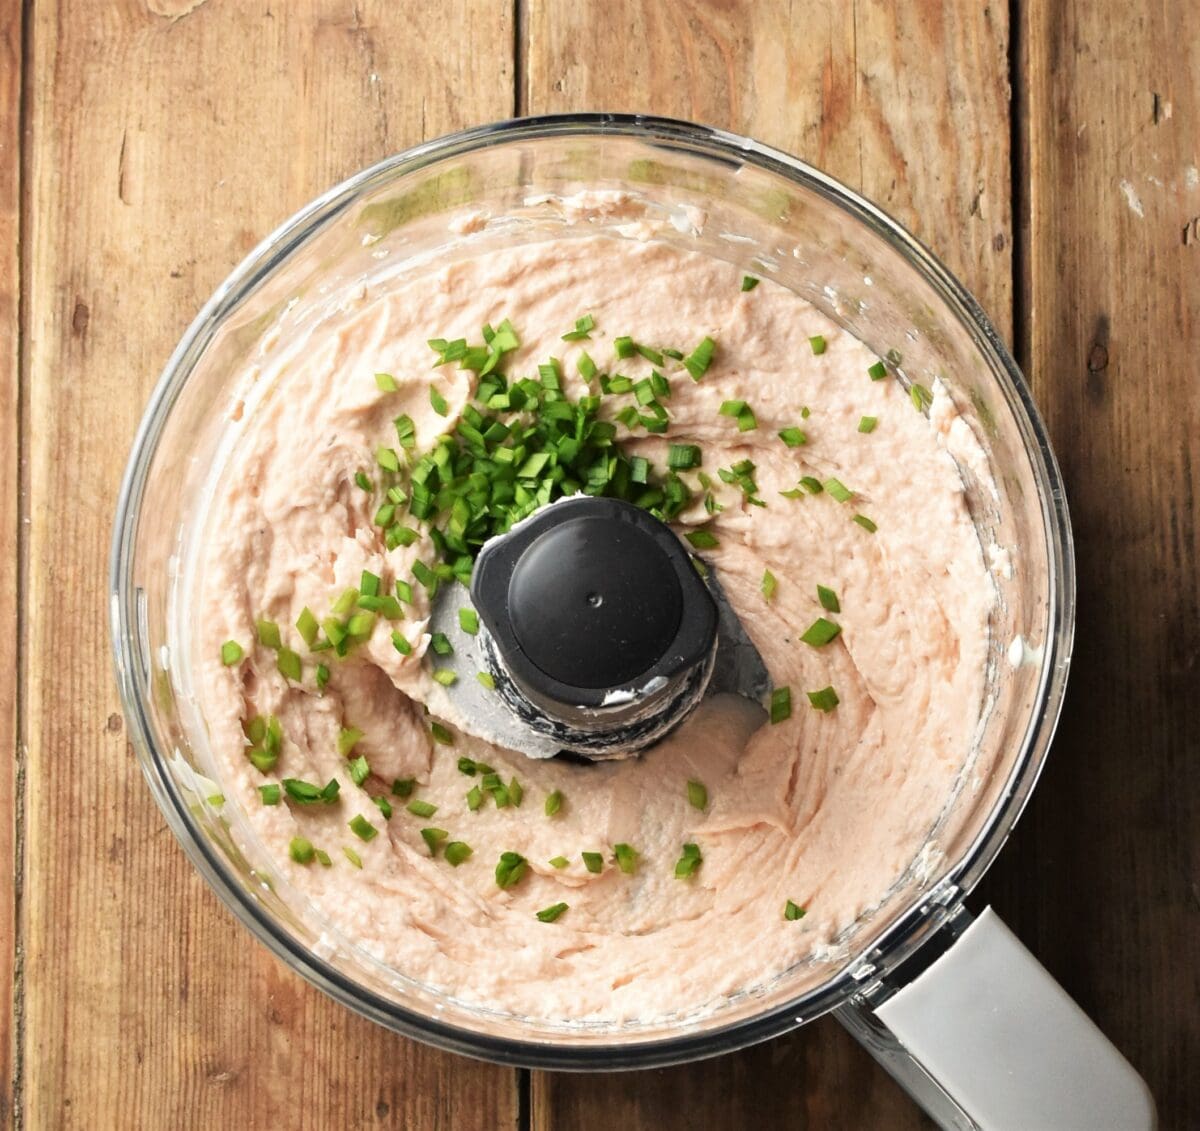 Creamy salmon spread mixture with chopped chives in blender bowl.